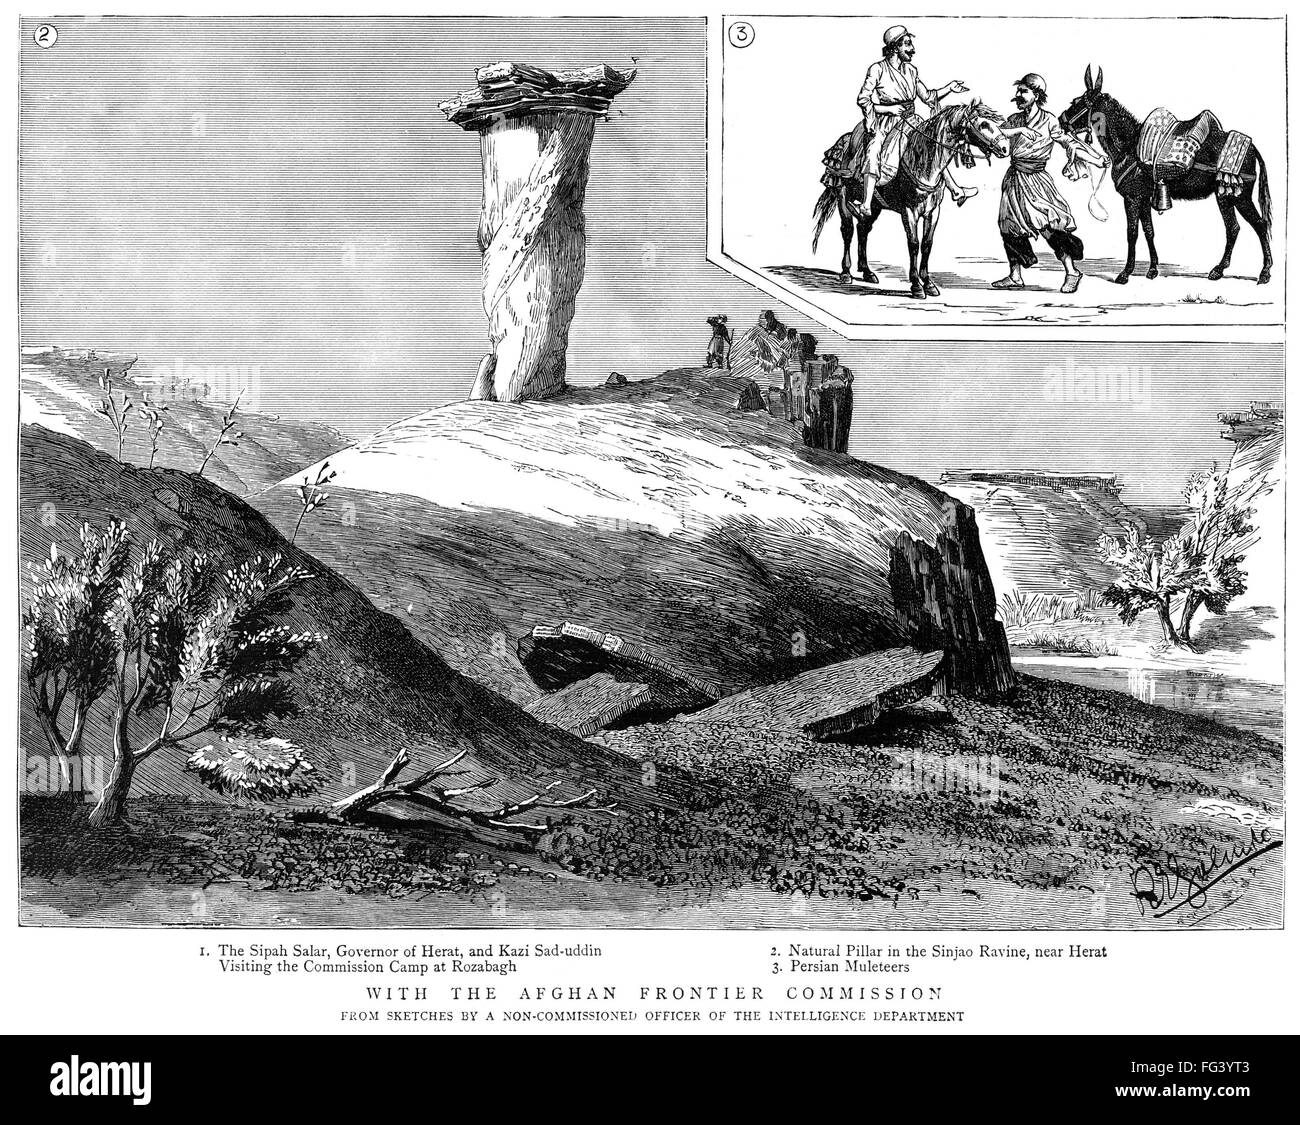 AFGHANISTAN: PILLAR, 1885. /nA natural pillar in the Sinjao Ravine, near Herat, Afghanistan. In the inset is an illustration of Persian Muleteers. Wood engraving, English, 1885. Stock Photo